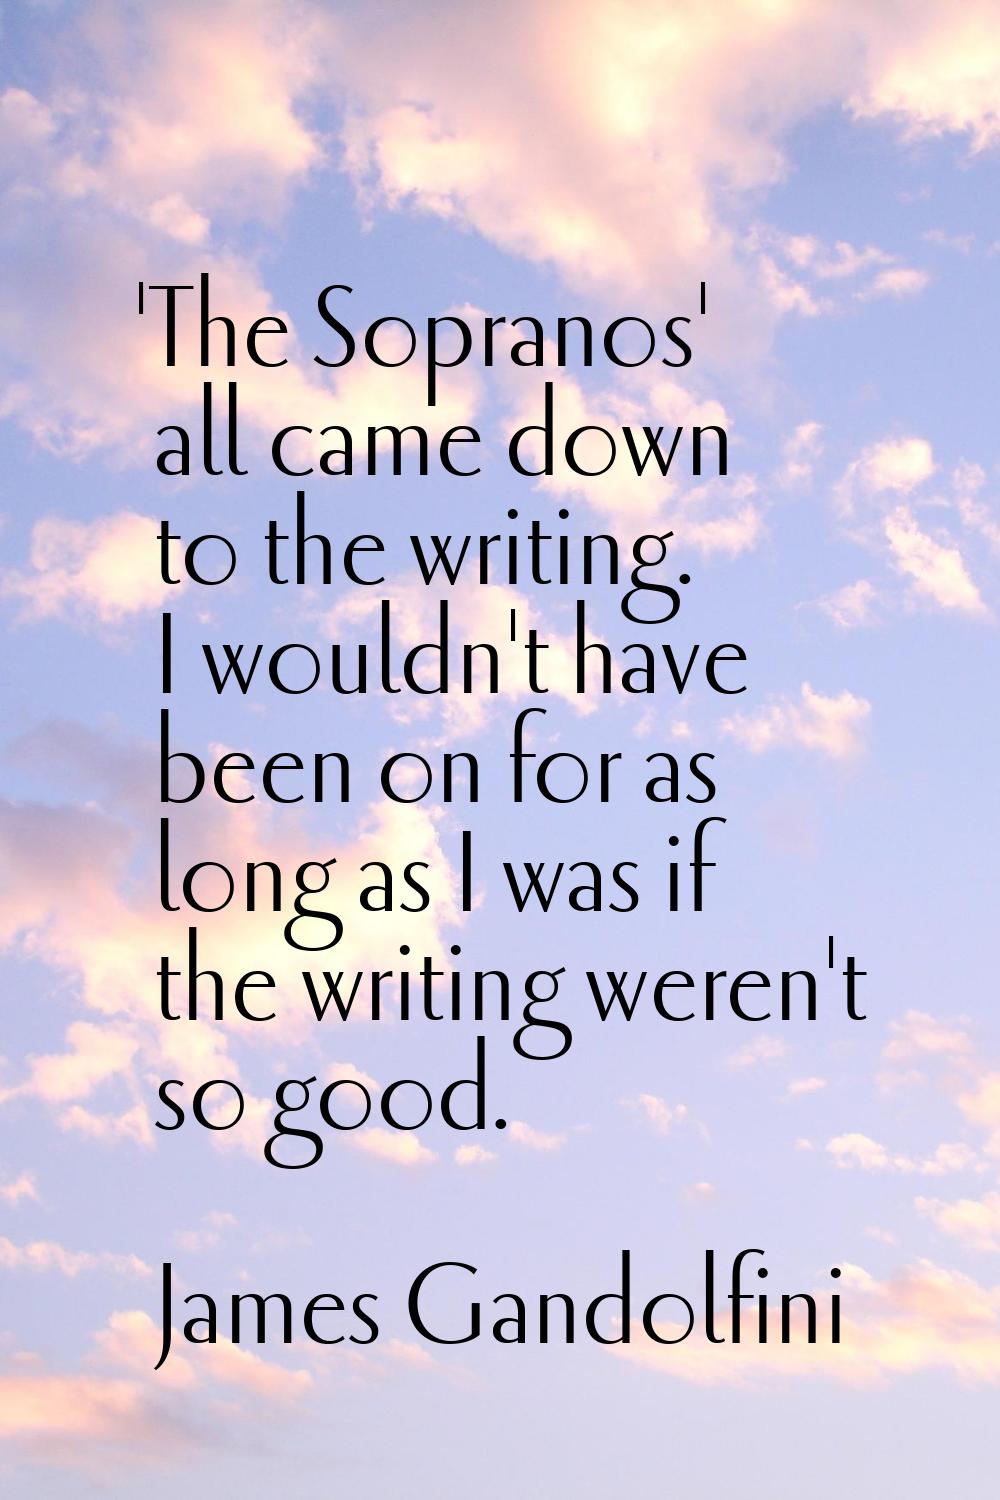 'The Sopranos' all came down to the writing. I wouldn't have been on for as long as I was if the wr